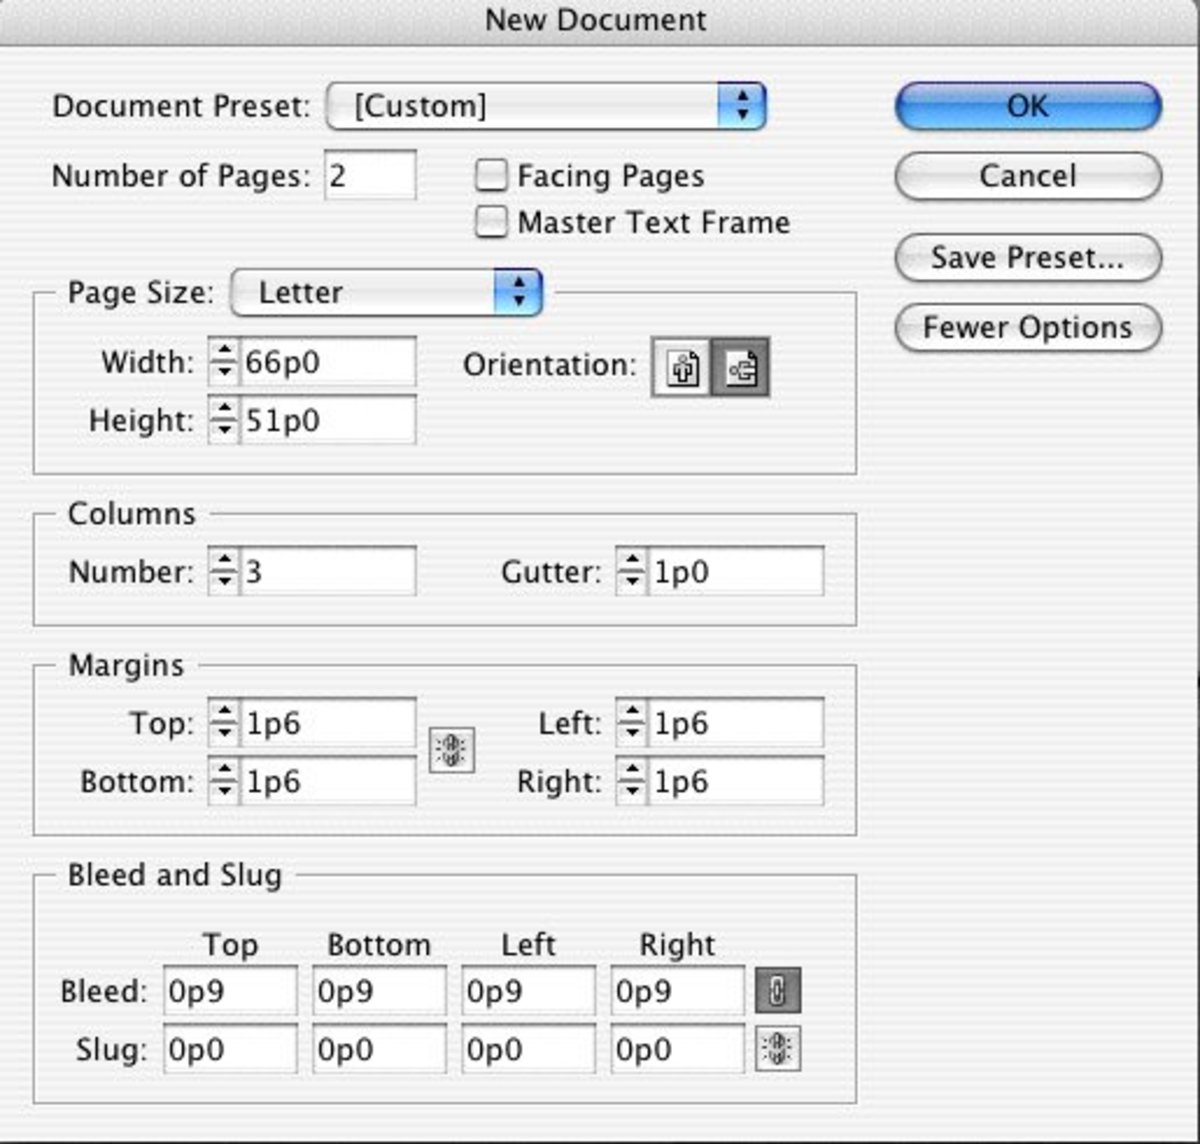 Document settings for a Tri-Fold Brochure in Adobe InDesign.